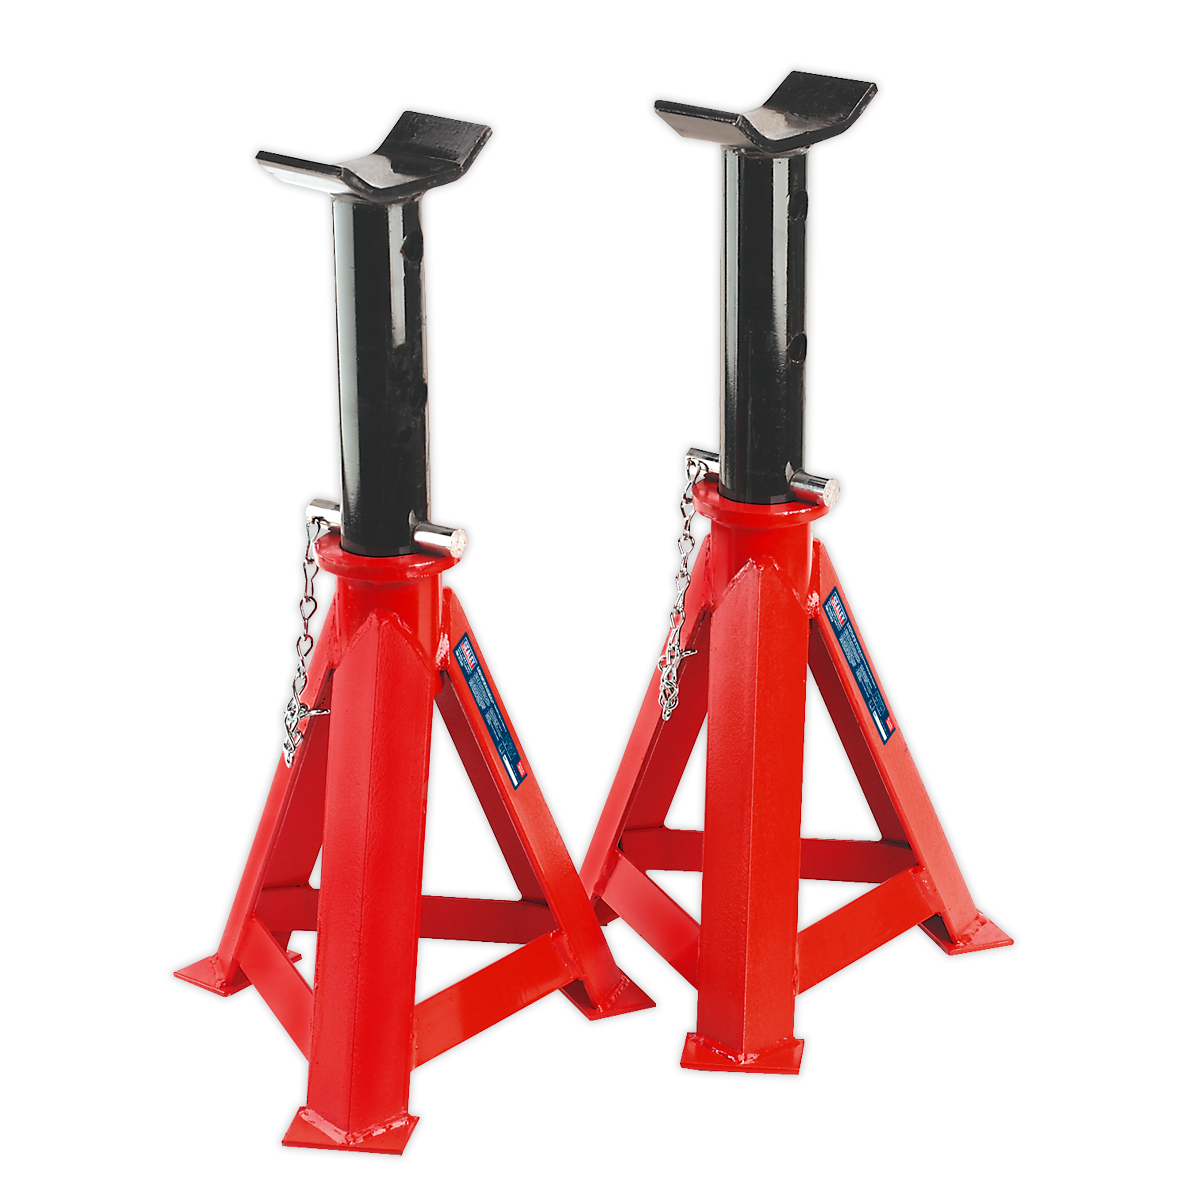 SEALEY - AS12000 Axle Stands (Pair) 12tonne Capacity per Stand